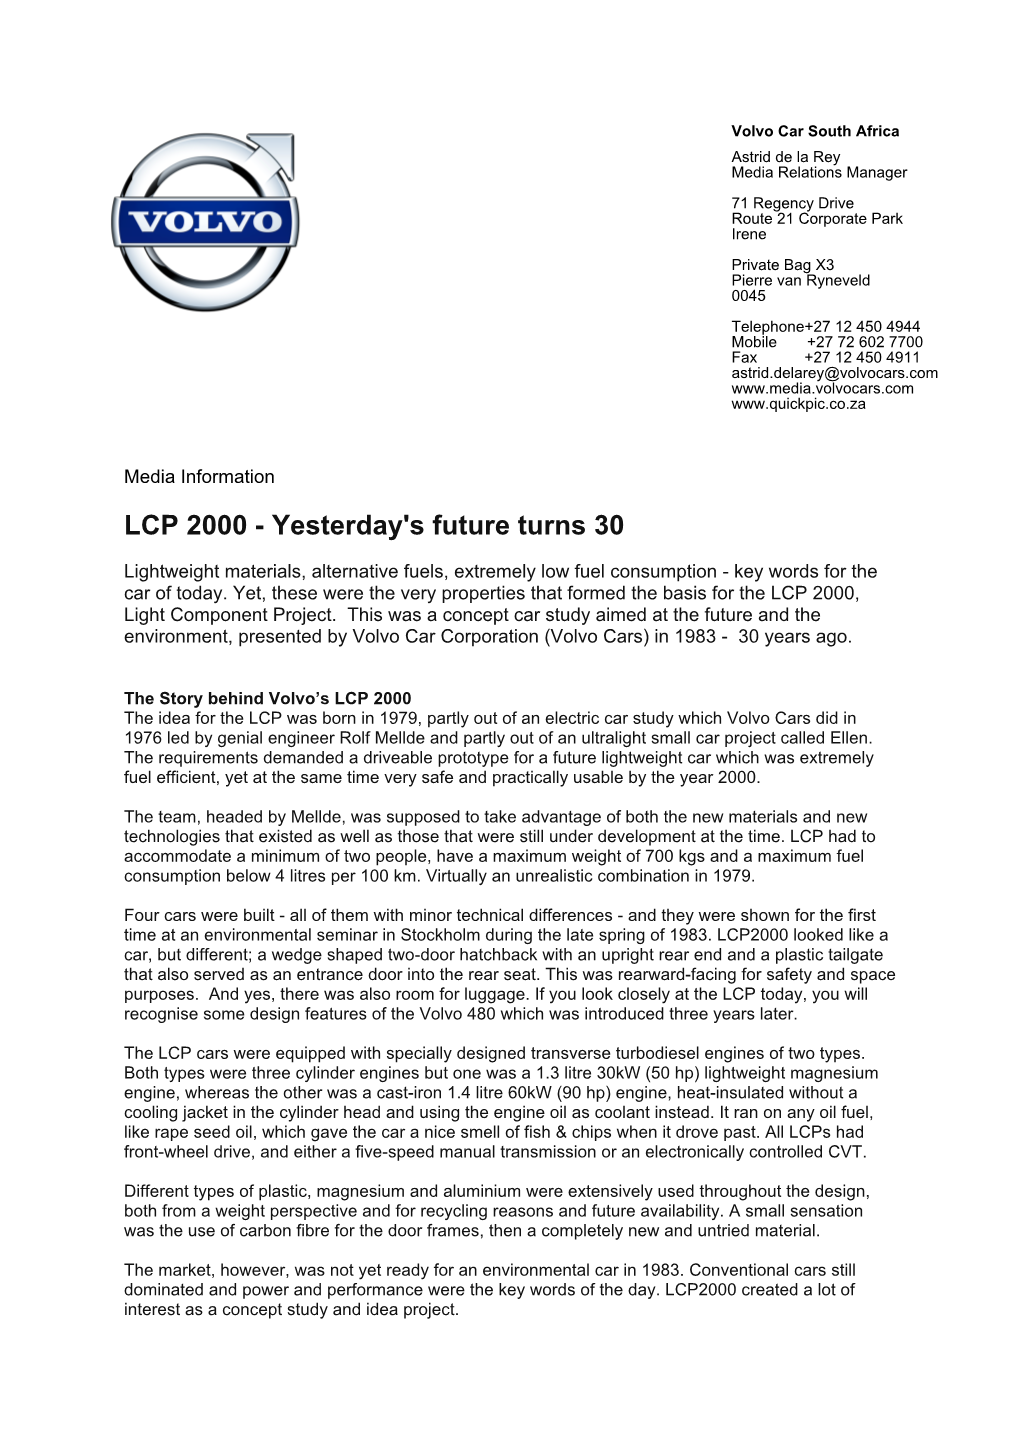 LCP 2000 - Yesterday's Future Turns 30